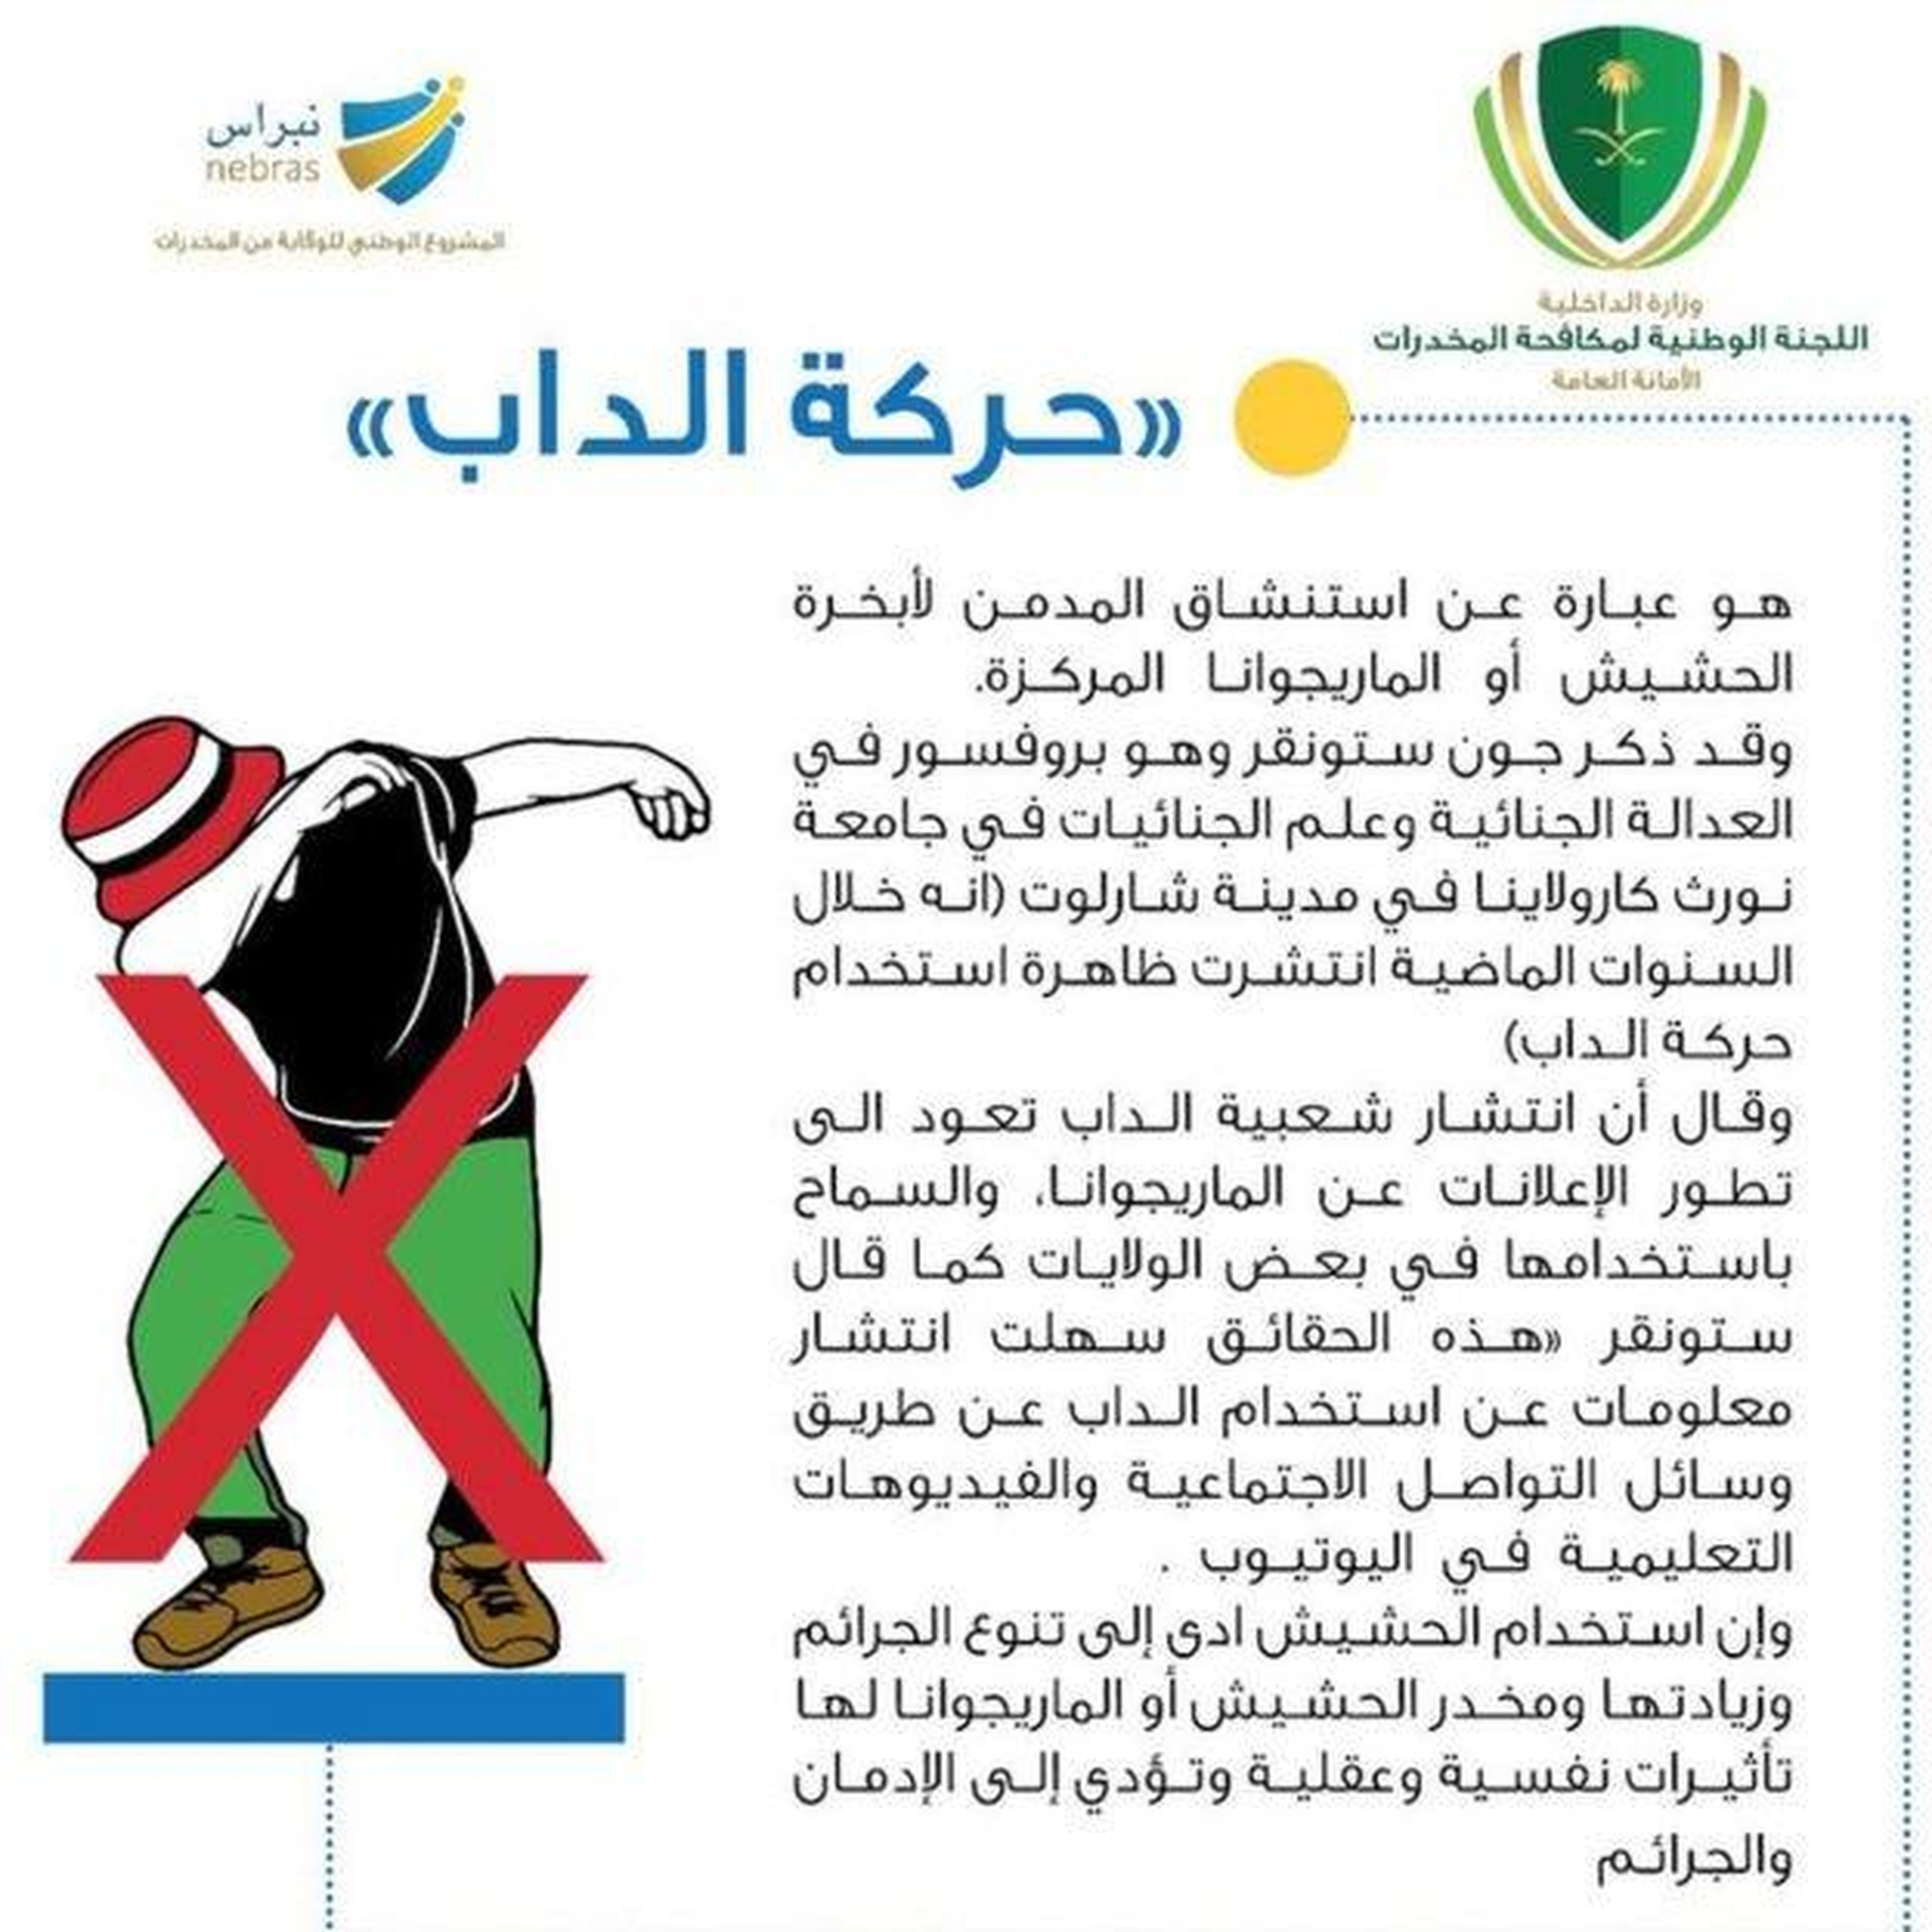 A poster from the Saudi Interior Ministry's National Commission for Combating Drugs saying that dabbing was banned and warning "people about the dangers of this on the youth and society."